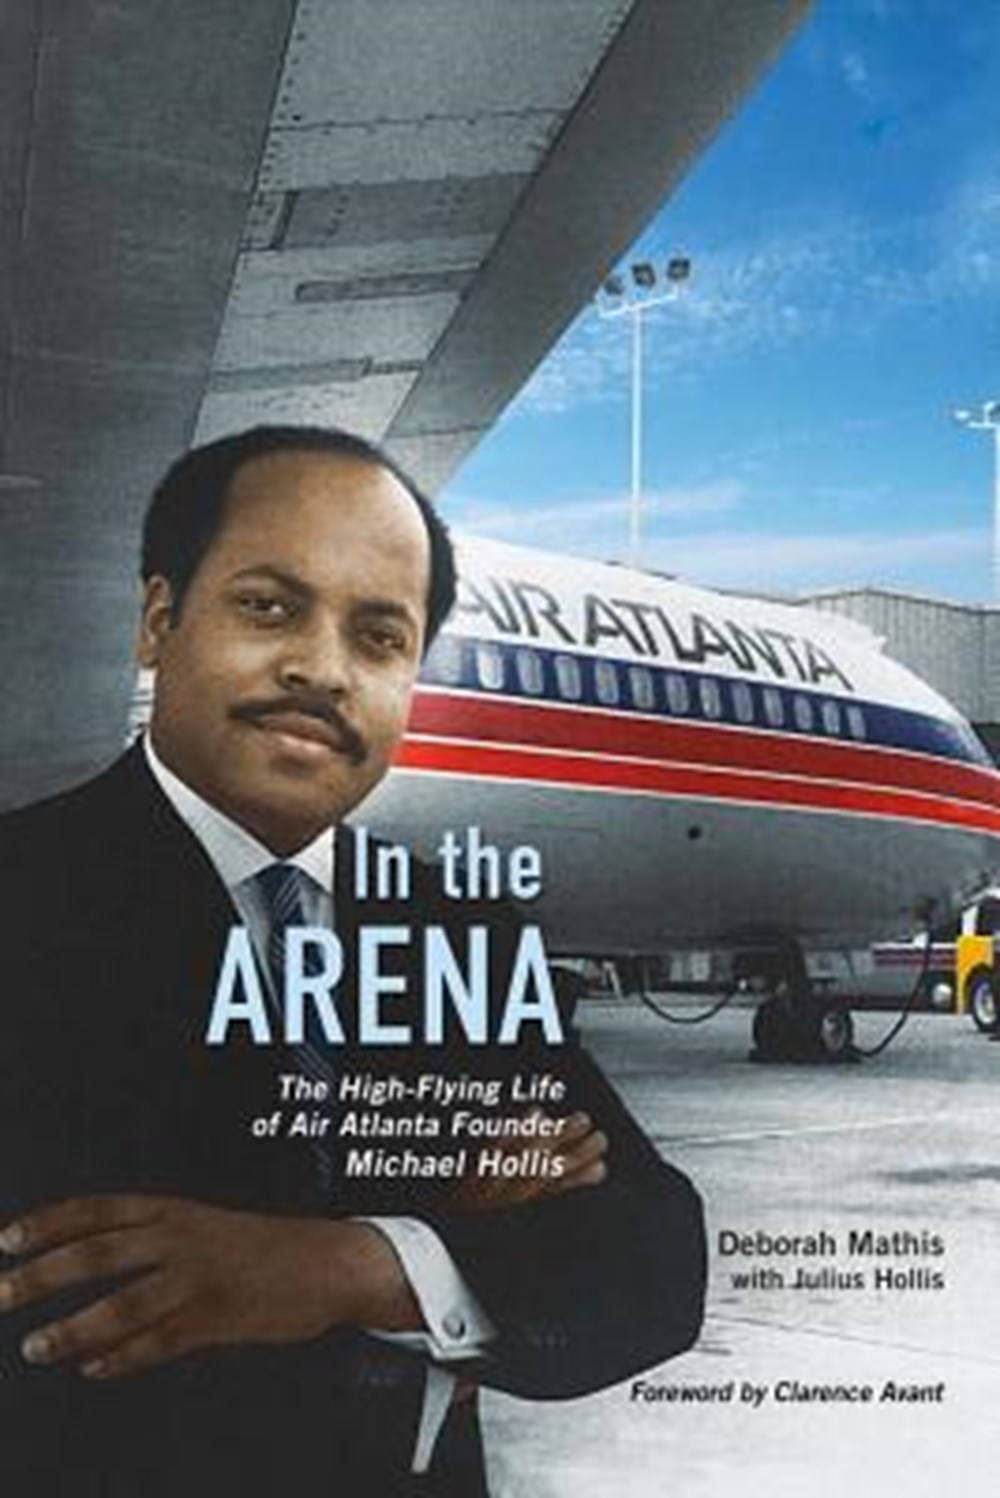 In the Arena The High-Flying Life of Air Atlanta Founder Michael Hollis